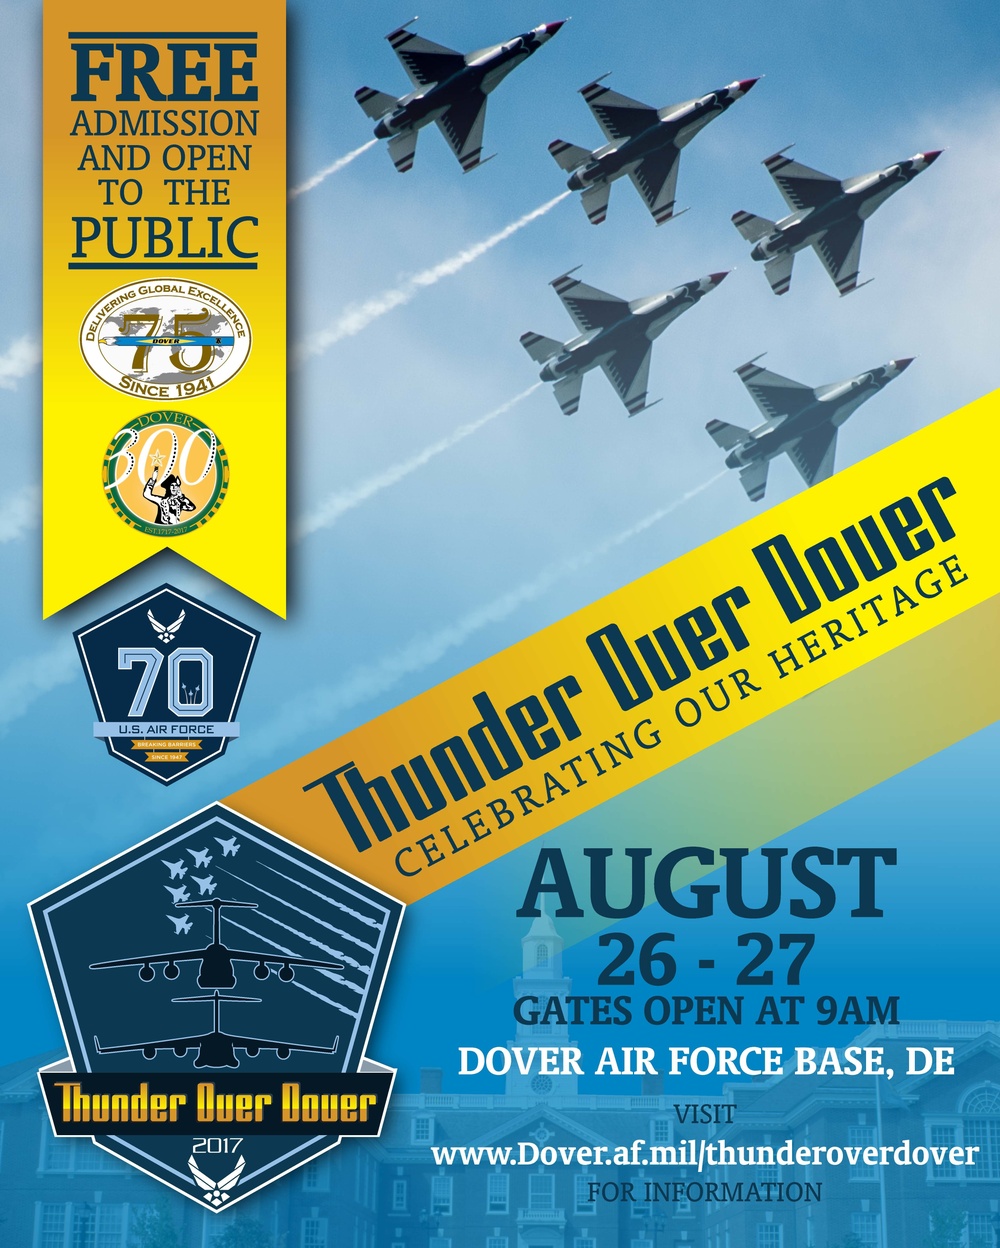 Thunder Over Dover is just around the corner